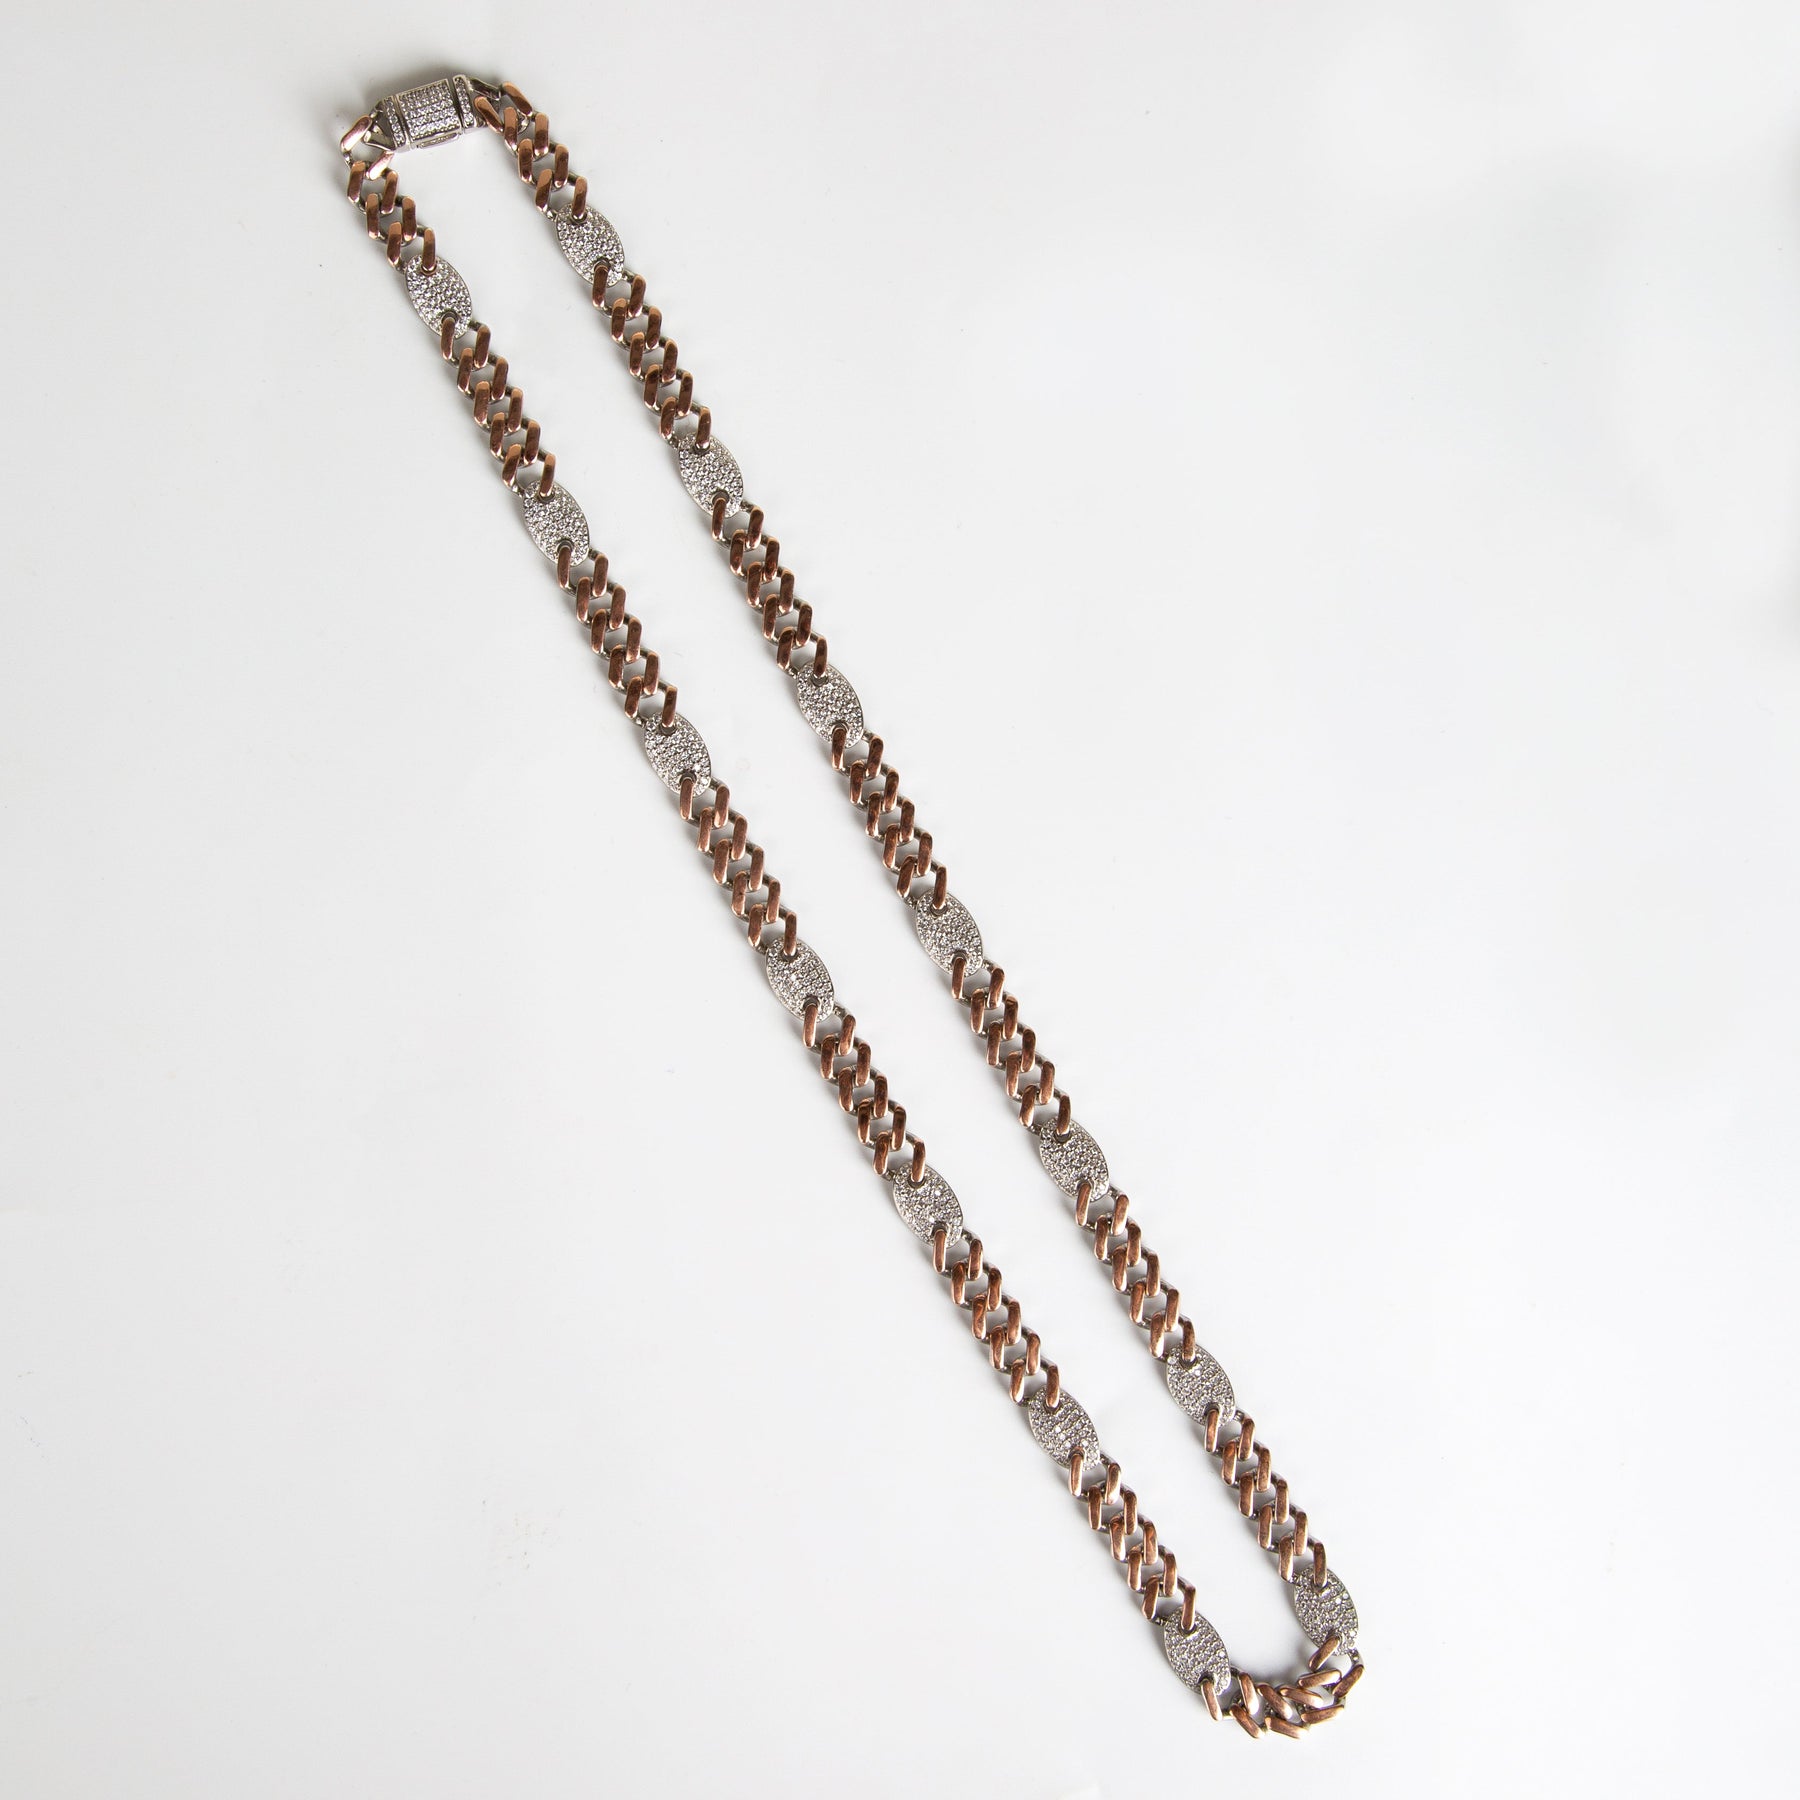 Just You & Me Men's chain